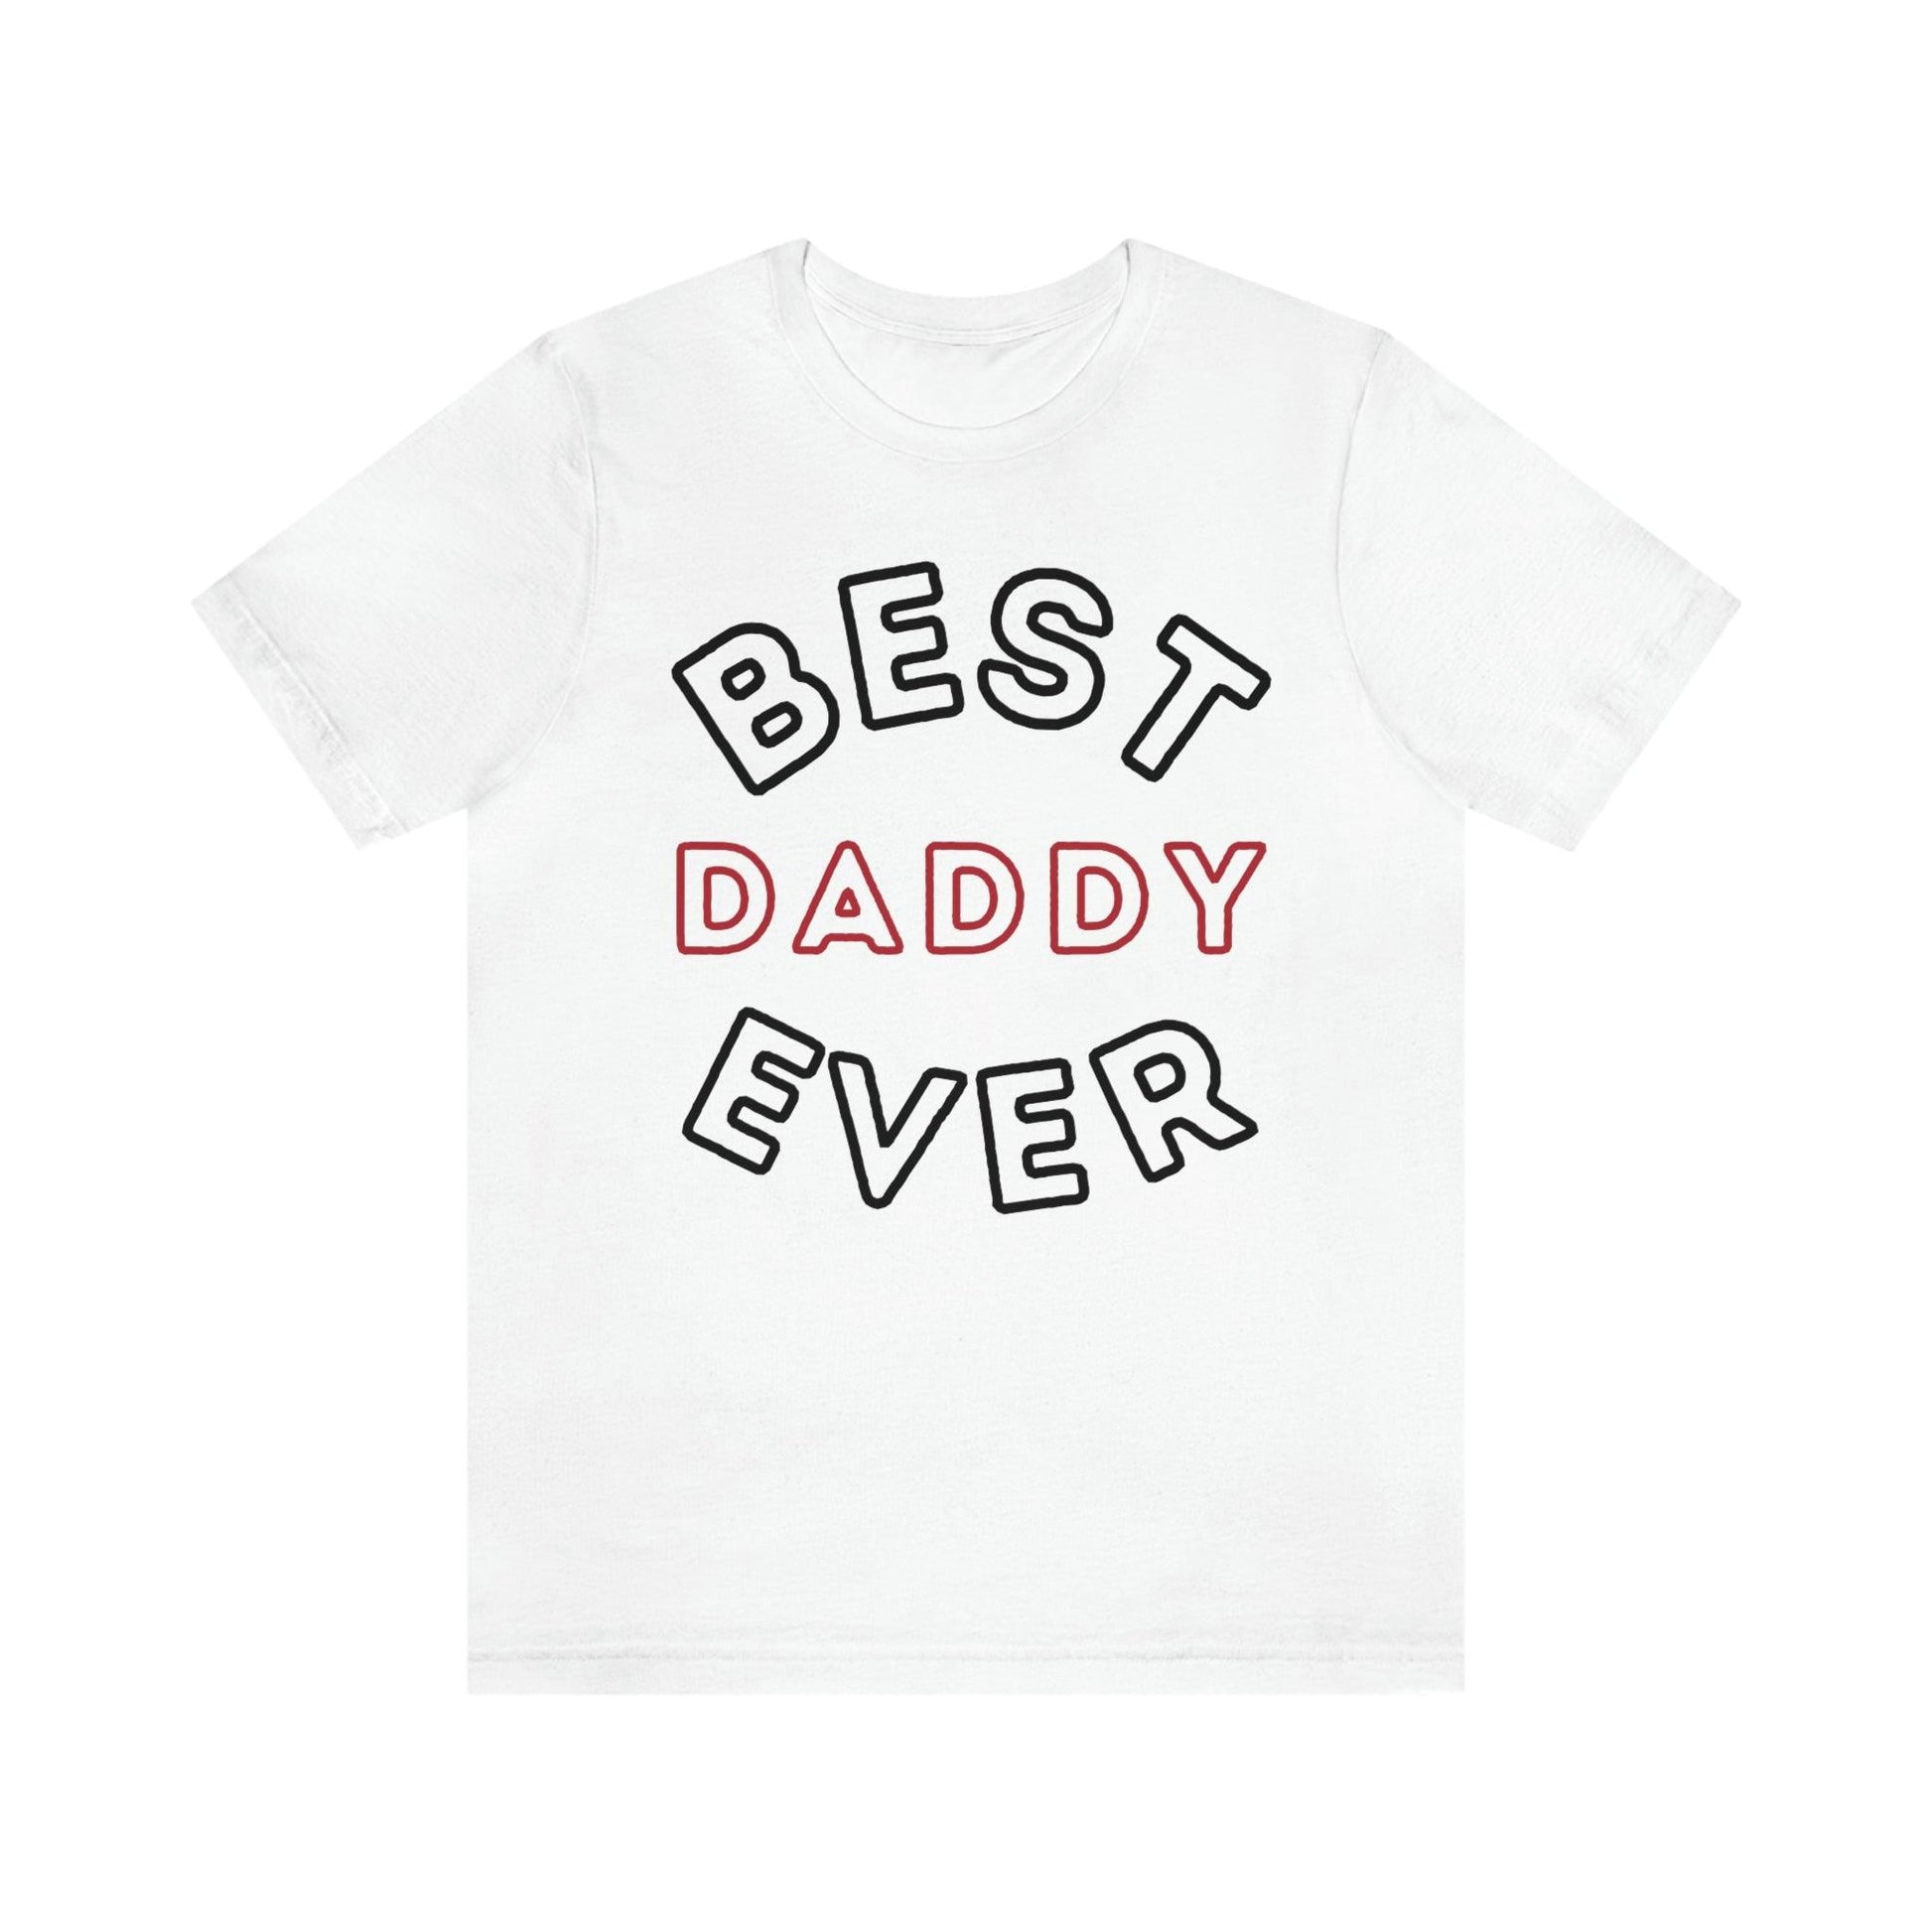 Dad Gift - Best Dad Gift - Best Daddy Ever Shirt -Dad Shirt - Funny Fathers Gift - Husband Gift - Funny Dad Tshirt - Dad Birthday Gift - Giftsmojo